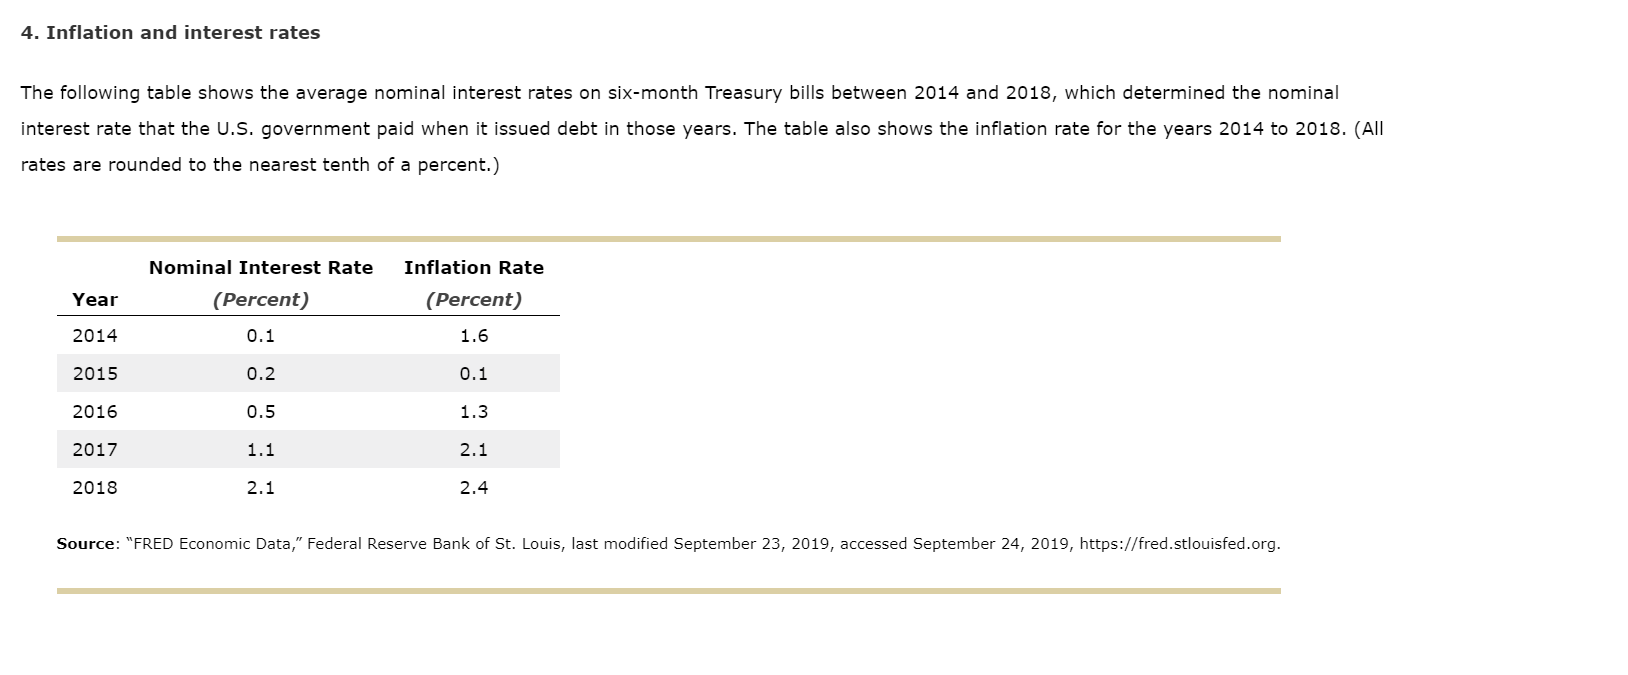 4. Inflation and interest rates
The following table shows the average nominal interest rates on six-month Treasury bills between 2014 and 2018, which determined the nominal
interest rate that the U.S. government paid when it issued debt in those years. The table also shows the inflation rate for the years 2014 to 2018. (All
rates are rounded to the nearest tenth of a percent.)
Inflation Rate
Nominal Interest Rate
(Percent)
(Percent)
Year
2014
0.1
1.6
2015
0.2
0.1
2016
0.5
1.3
2017
1.1
2.1
2018
2.1
2.4
Source: "FRED Economic Data," Federal Reserve Bank of St. Louis, last modified September 23, 2019, accessed September 24, 2019, https://fred.stlouisfed.org.
